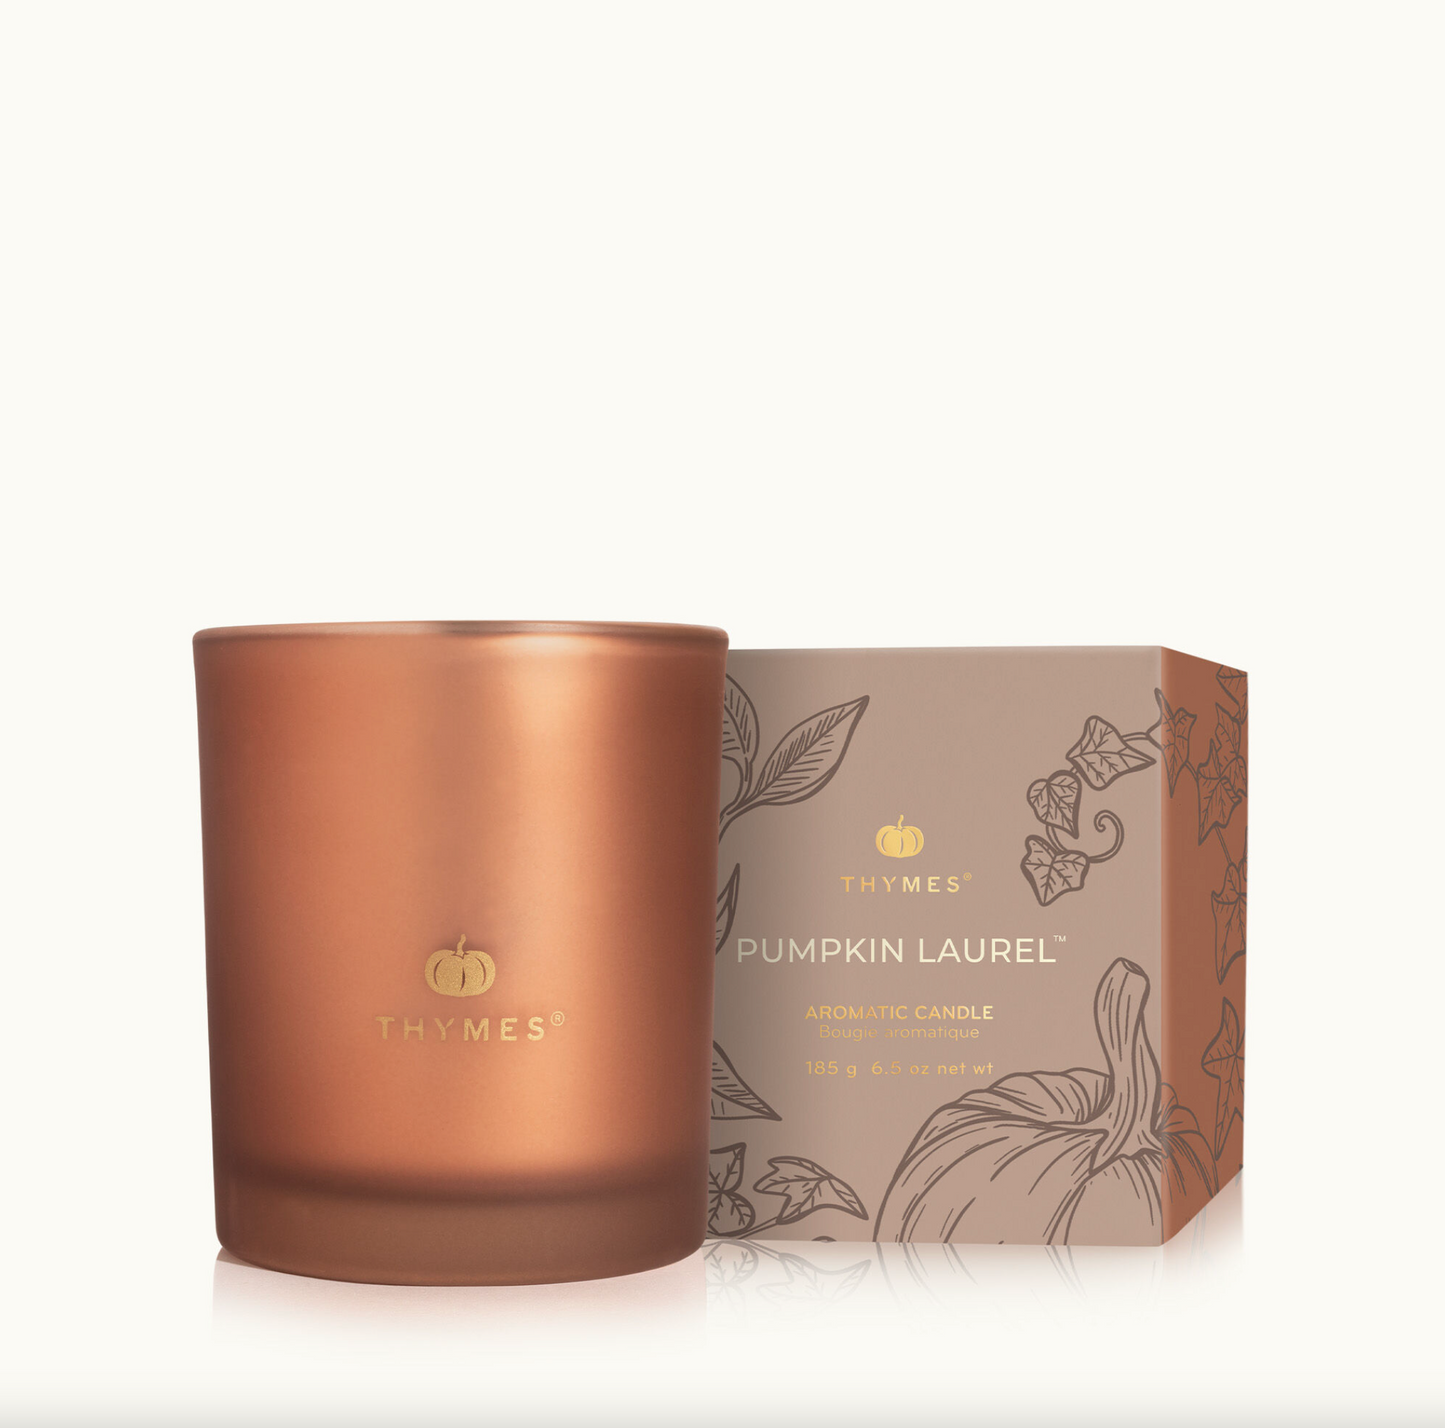 Thymes Pumpkin Laurel 6.5oz Candle Candles in  at Wrapsody